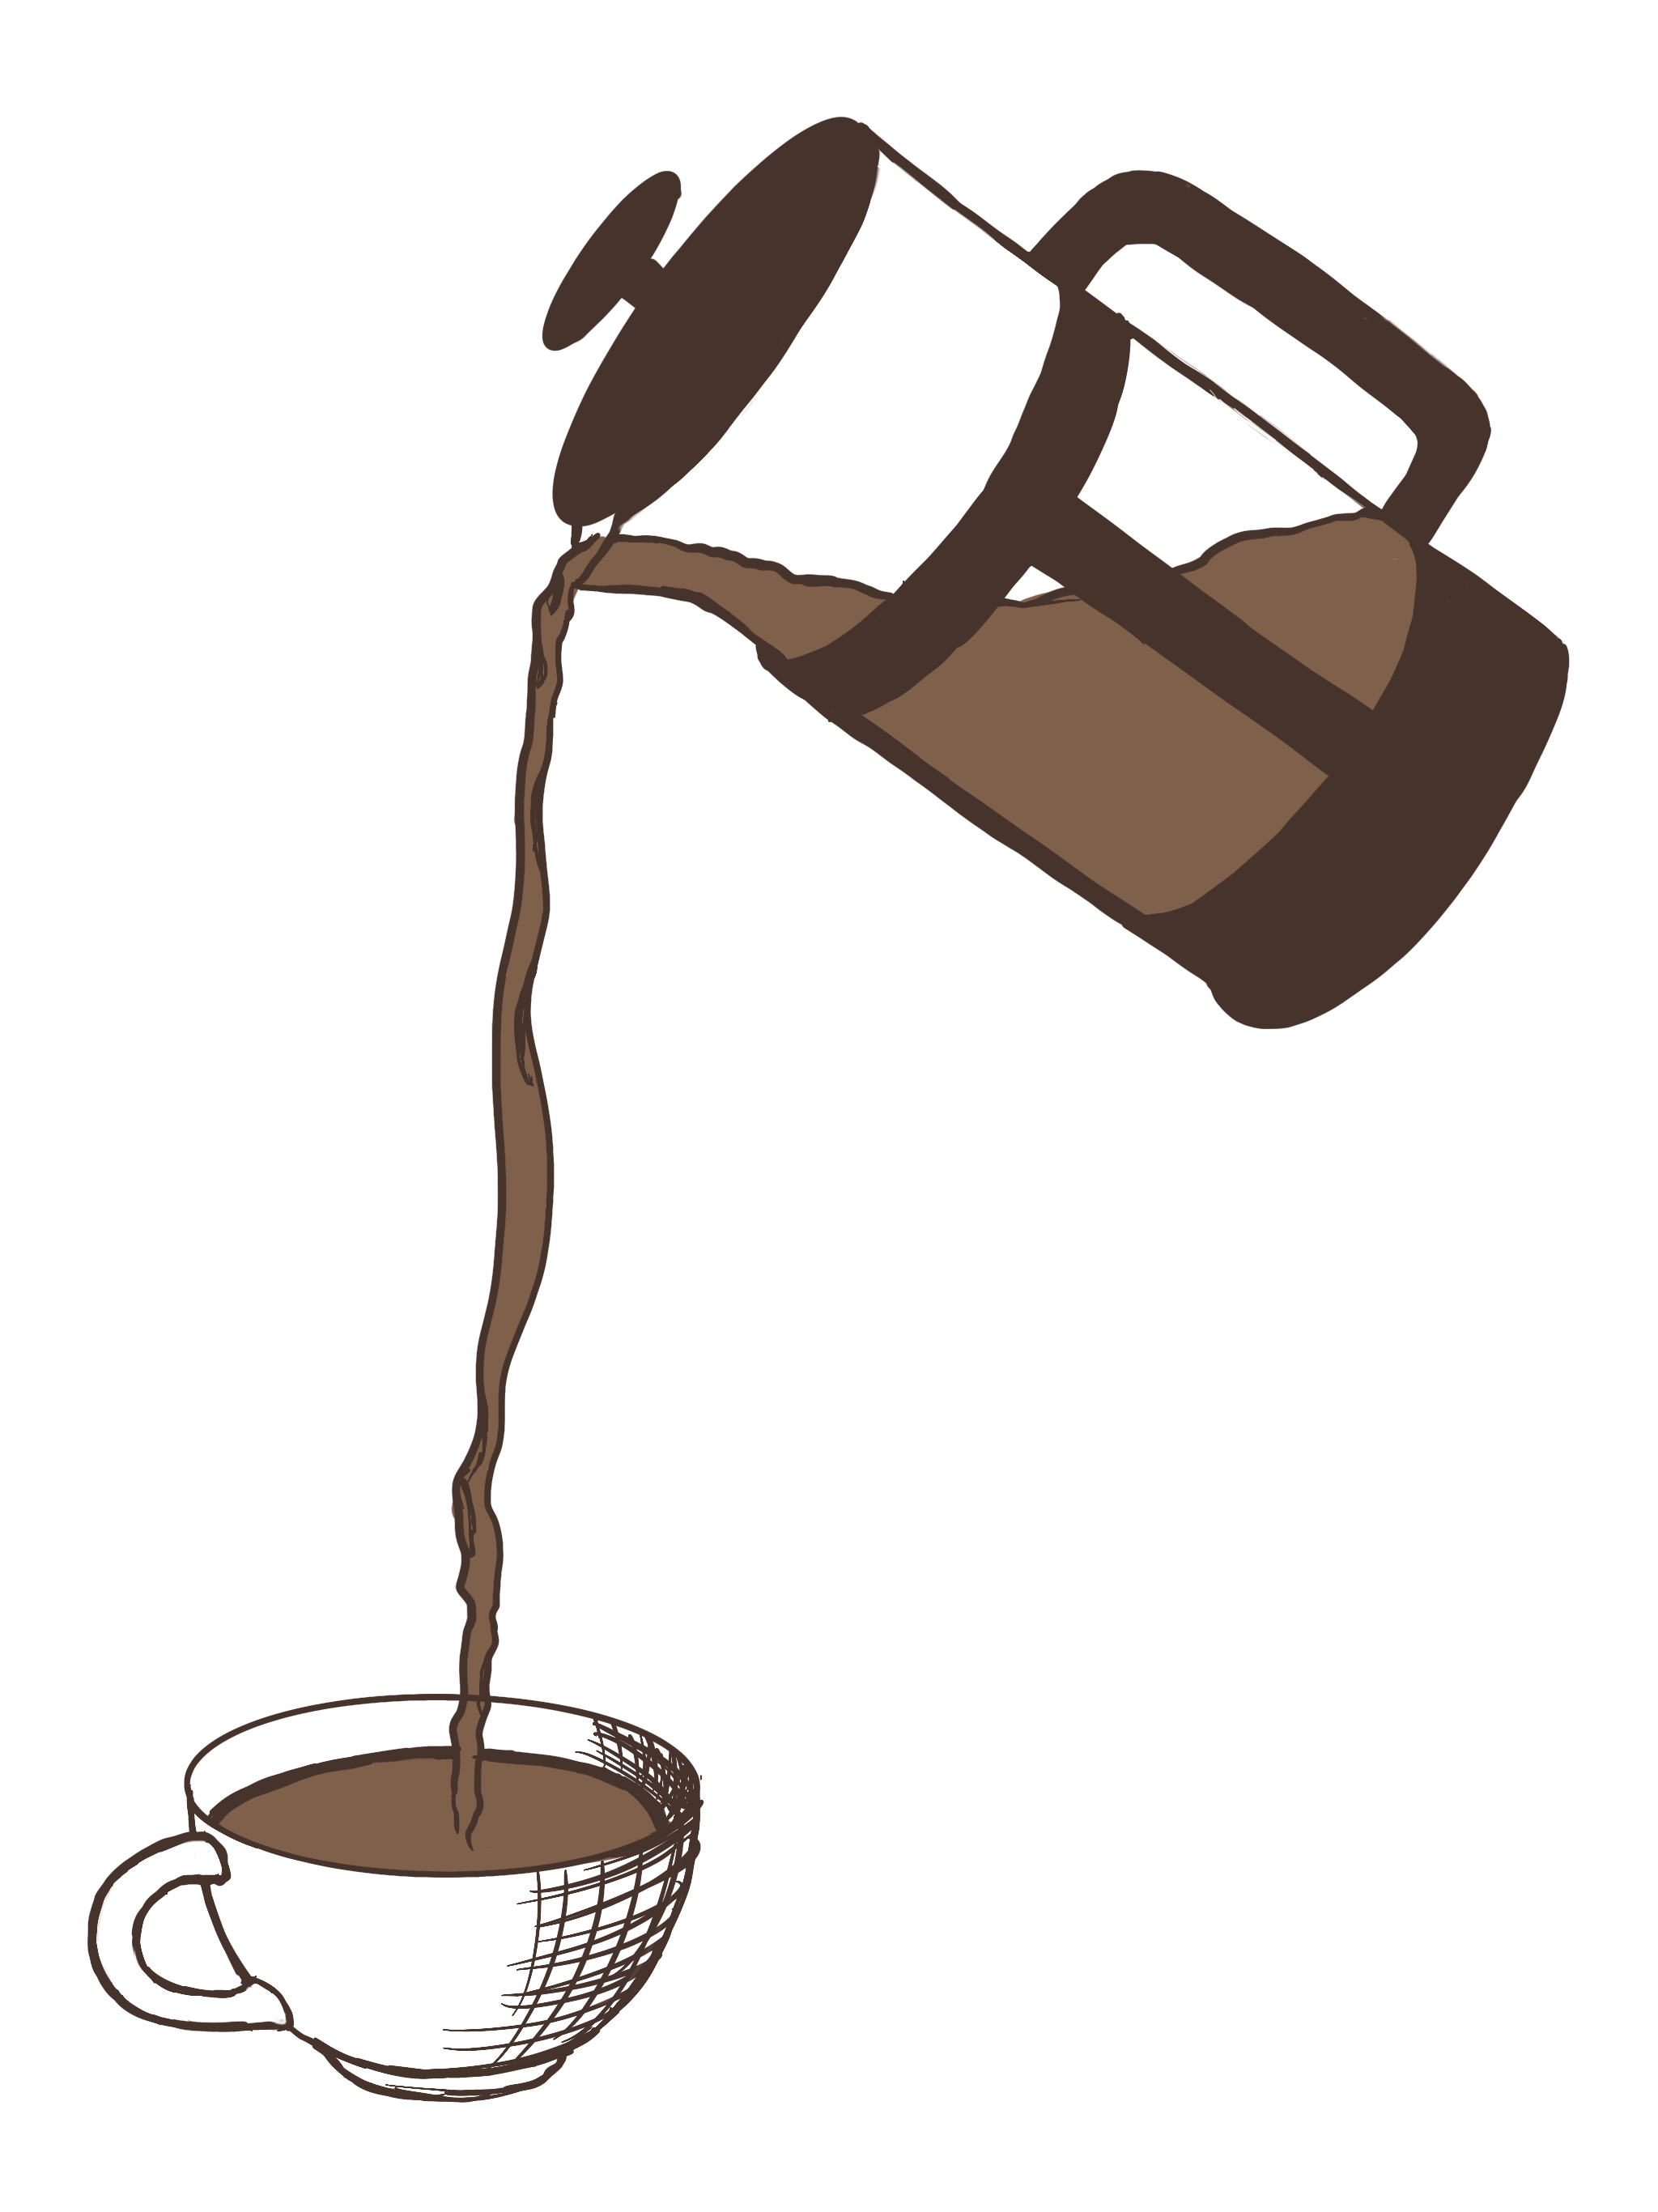 coffee pouring